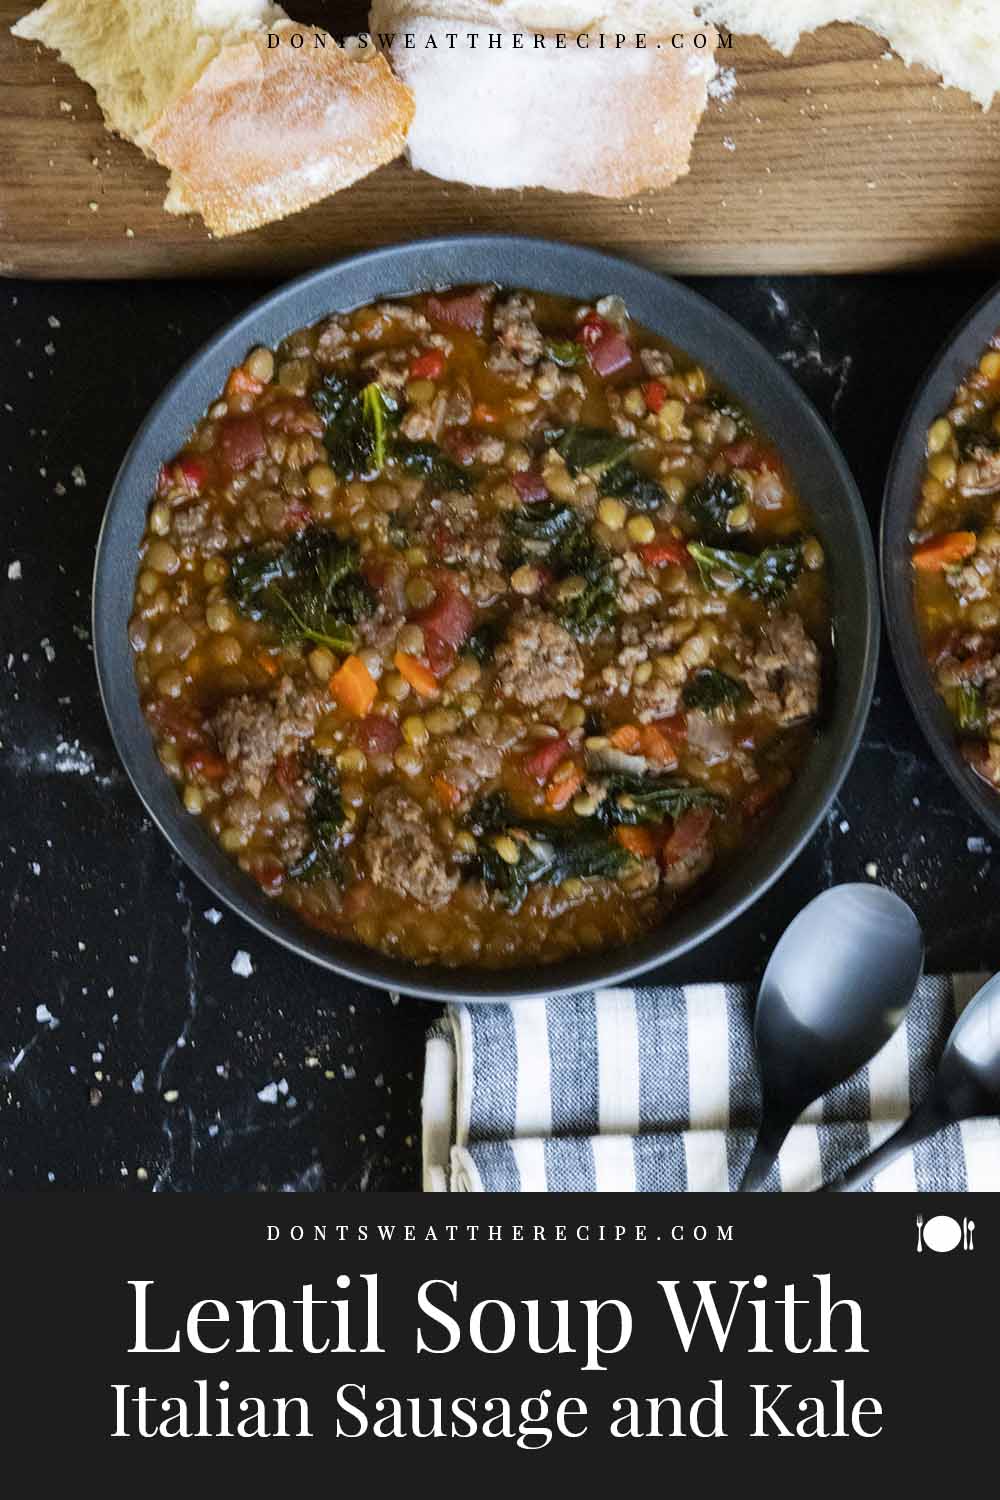 Lentil Soup with Italian Sausage - Don't Sweat The Recipe